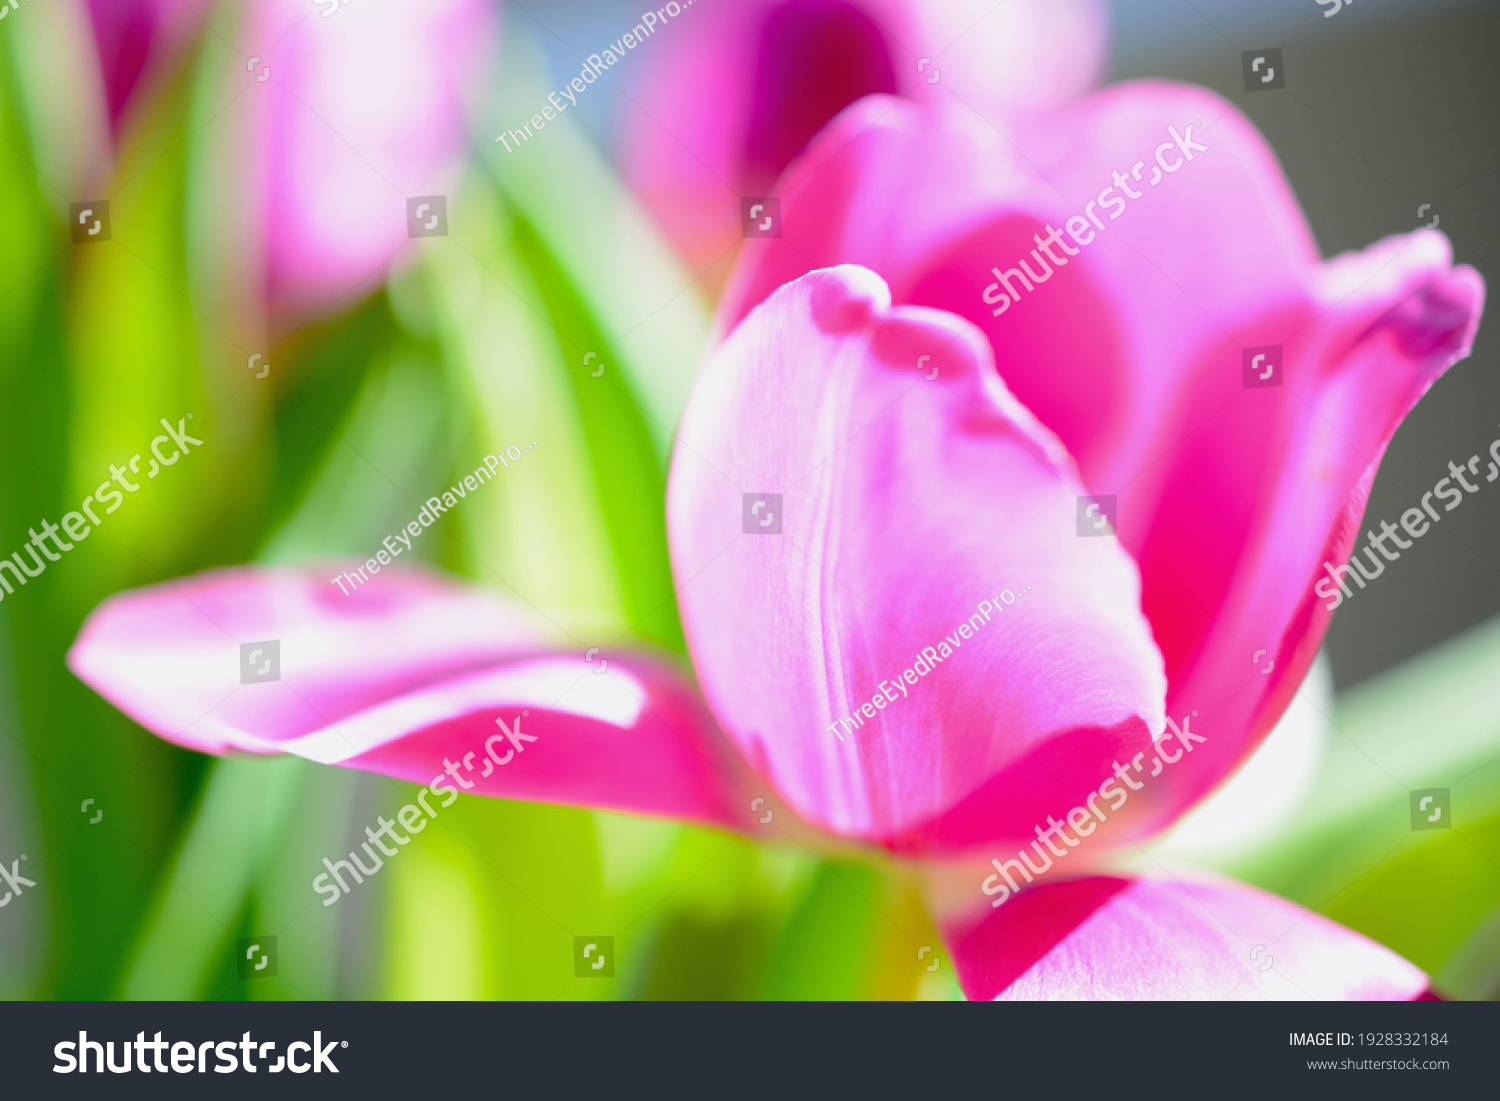 3,157,726 Bright pink flowers Images, Stock Photos & Vectors | Shutterstock